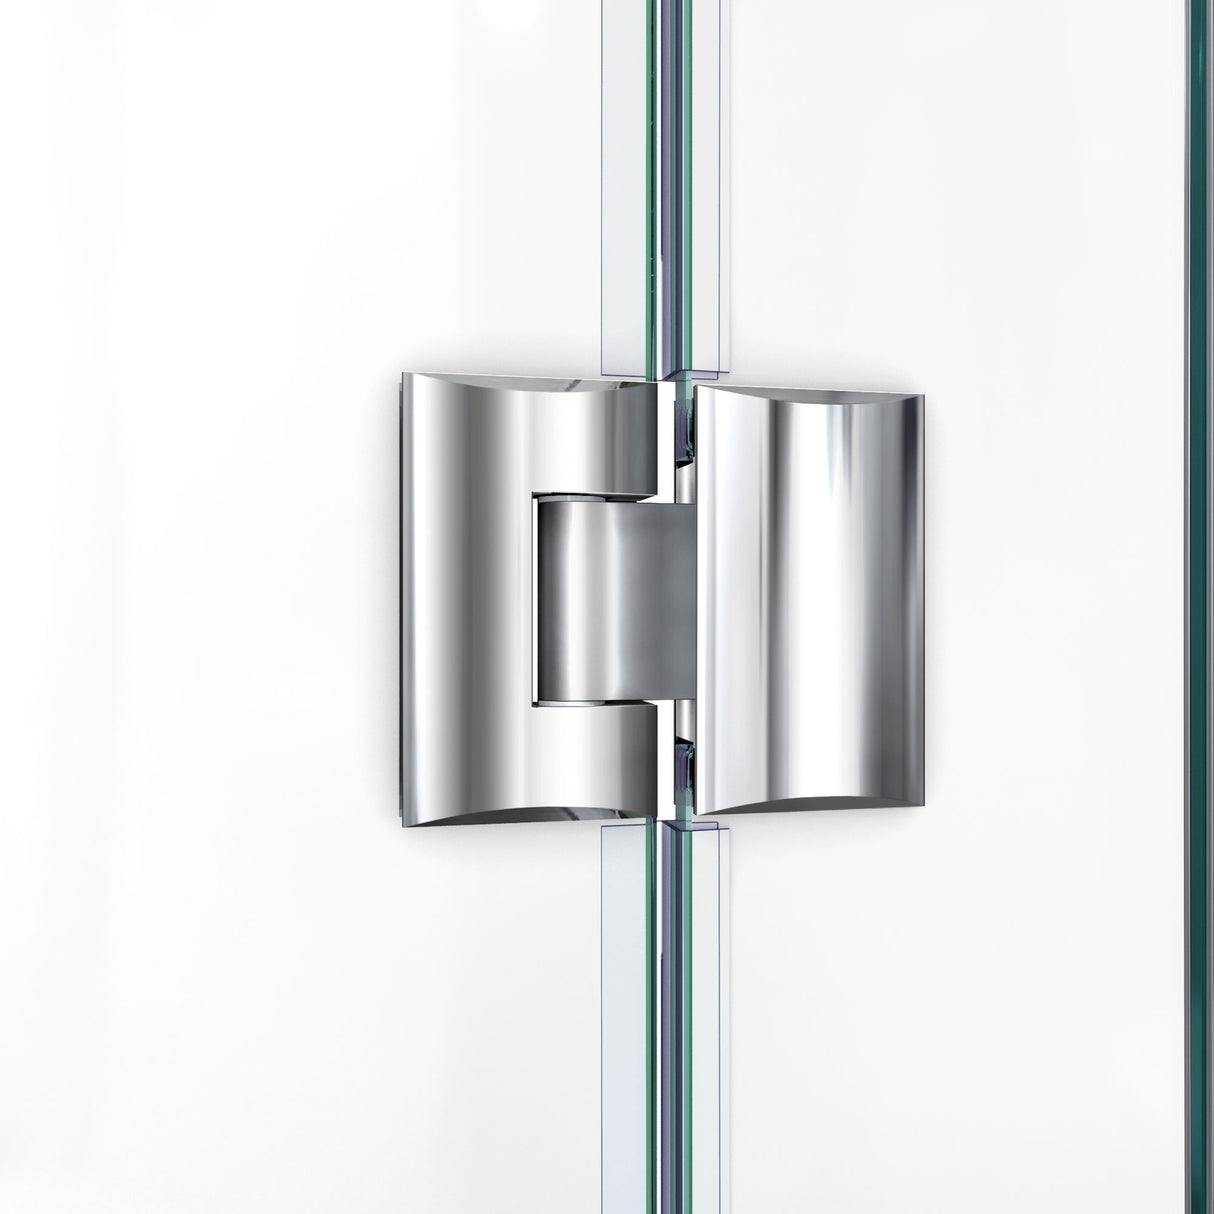 DreamLine Prism Plus 42 in. x 74 3/4 in. Frameless Neo-Angle Shower Enclosure in Brushed Nickel with White Base